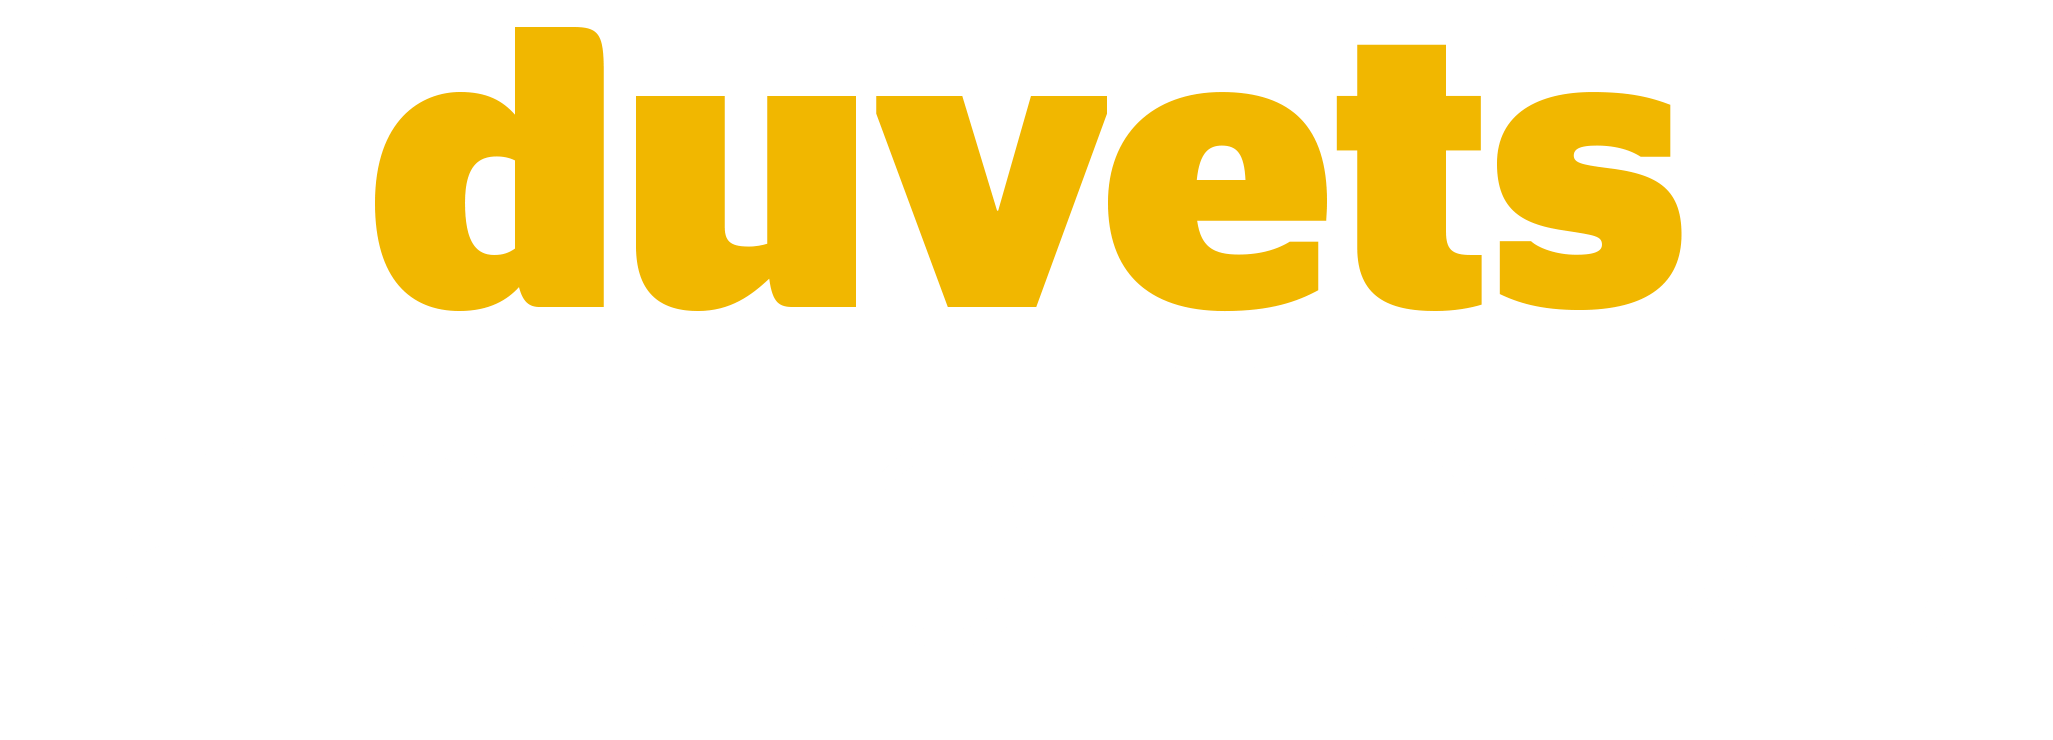 duvets and pillows